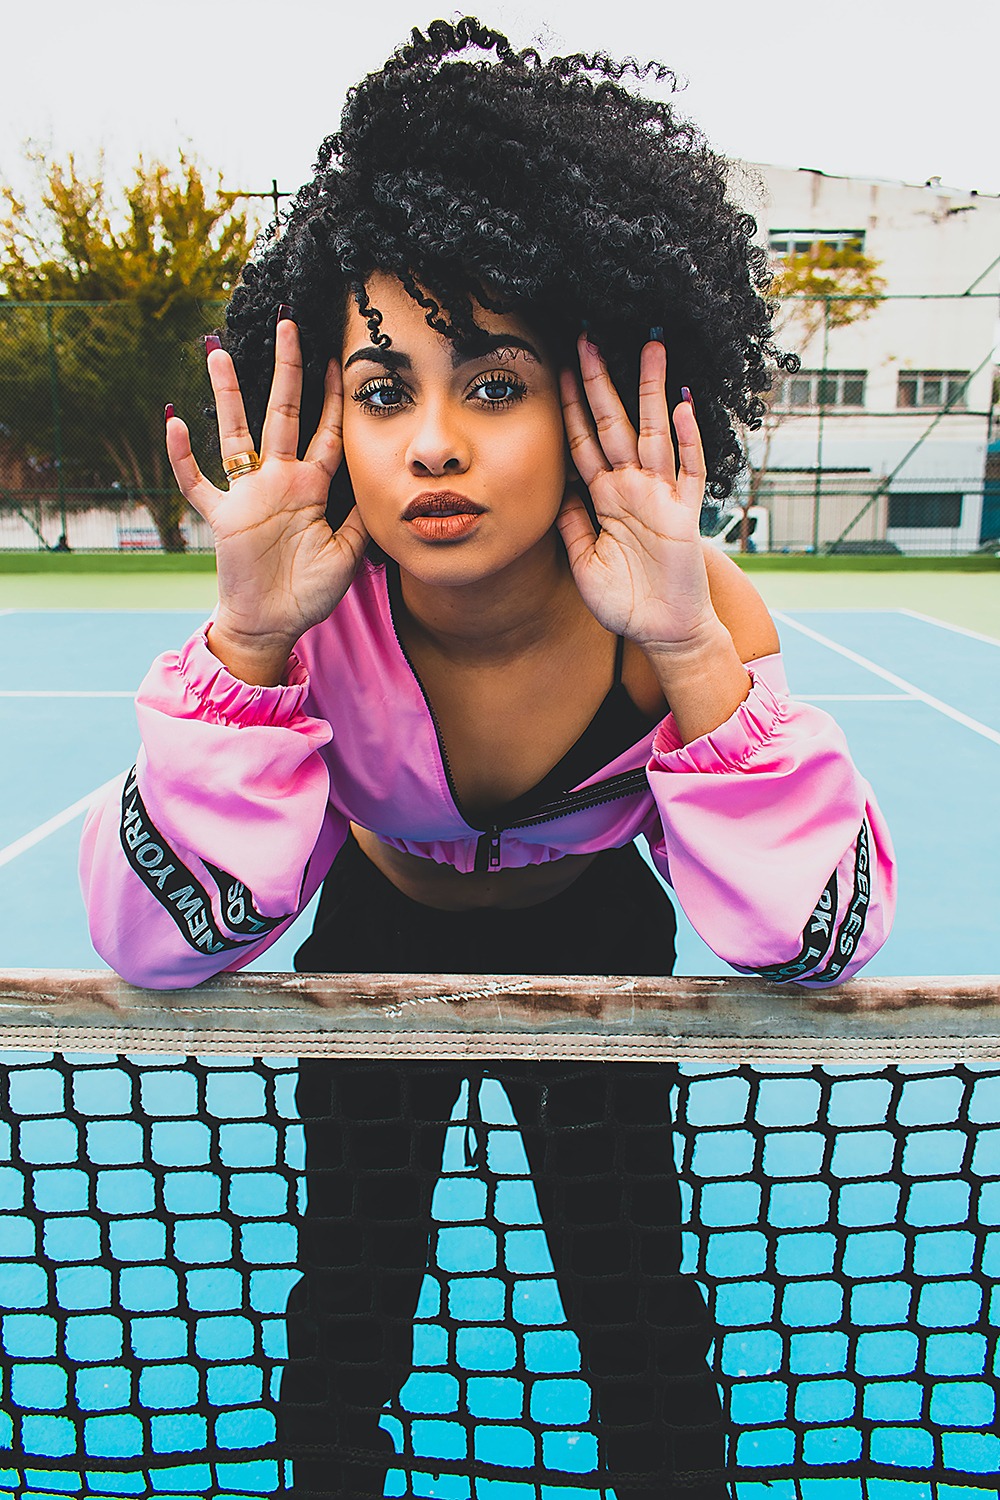 woman in sports jumper in a tennis court.